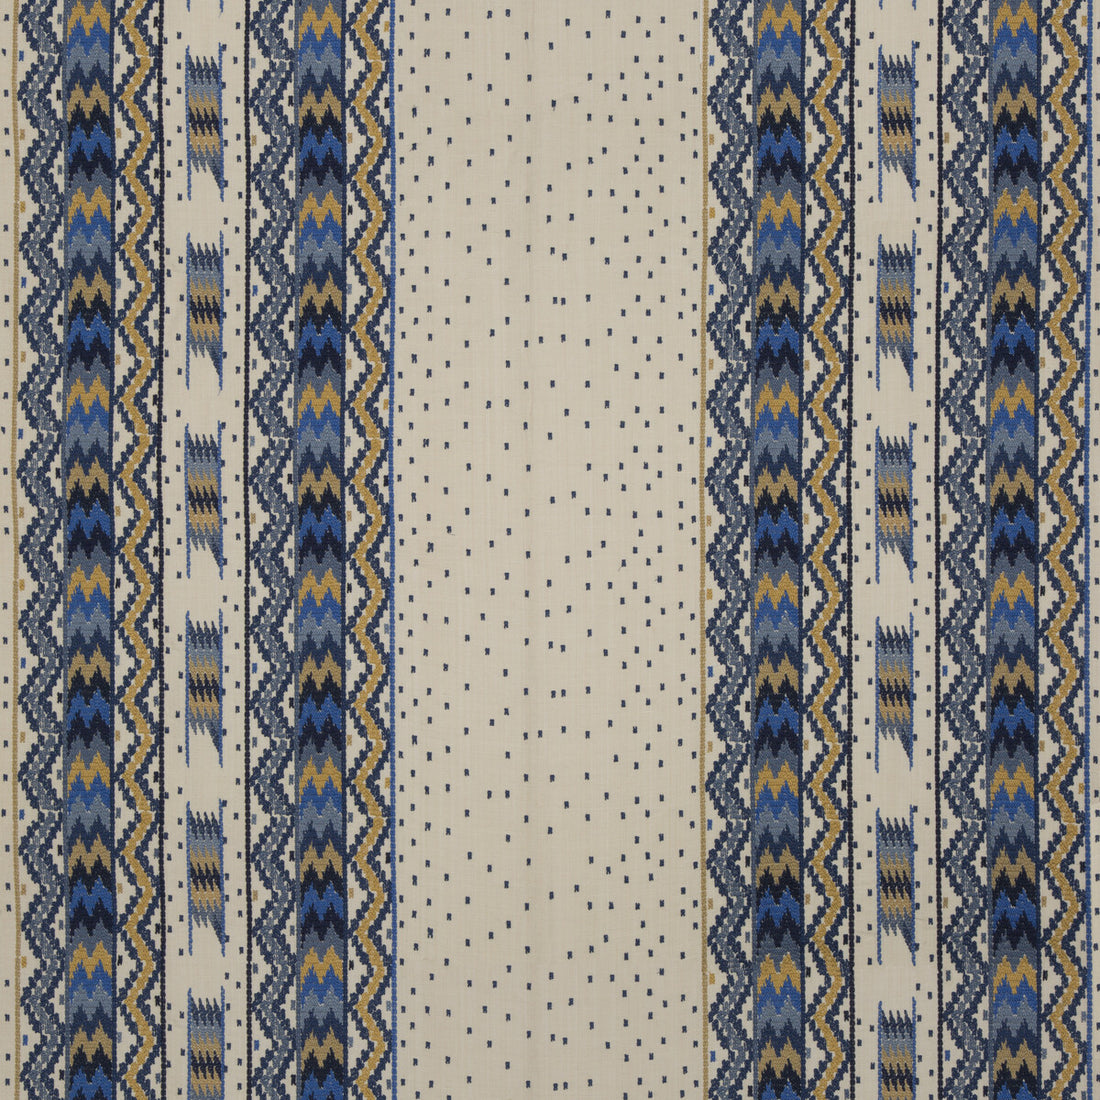 Talakona Stripe fabric in blue/gold color - pattern 8015174.54.0 - by Brunschwig &amp; Fils in the Cape Comorin collection